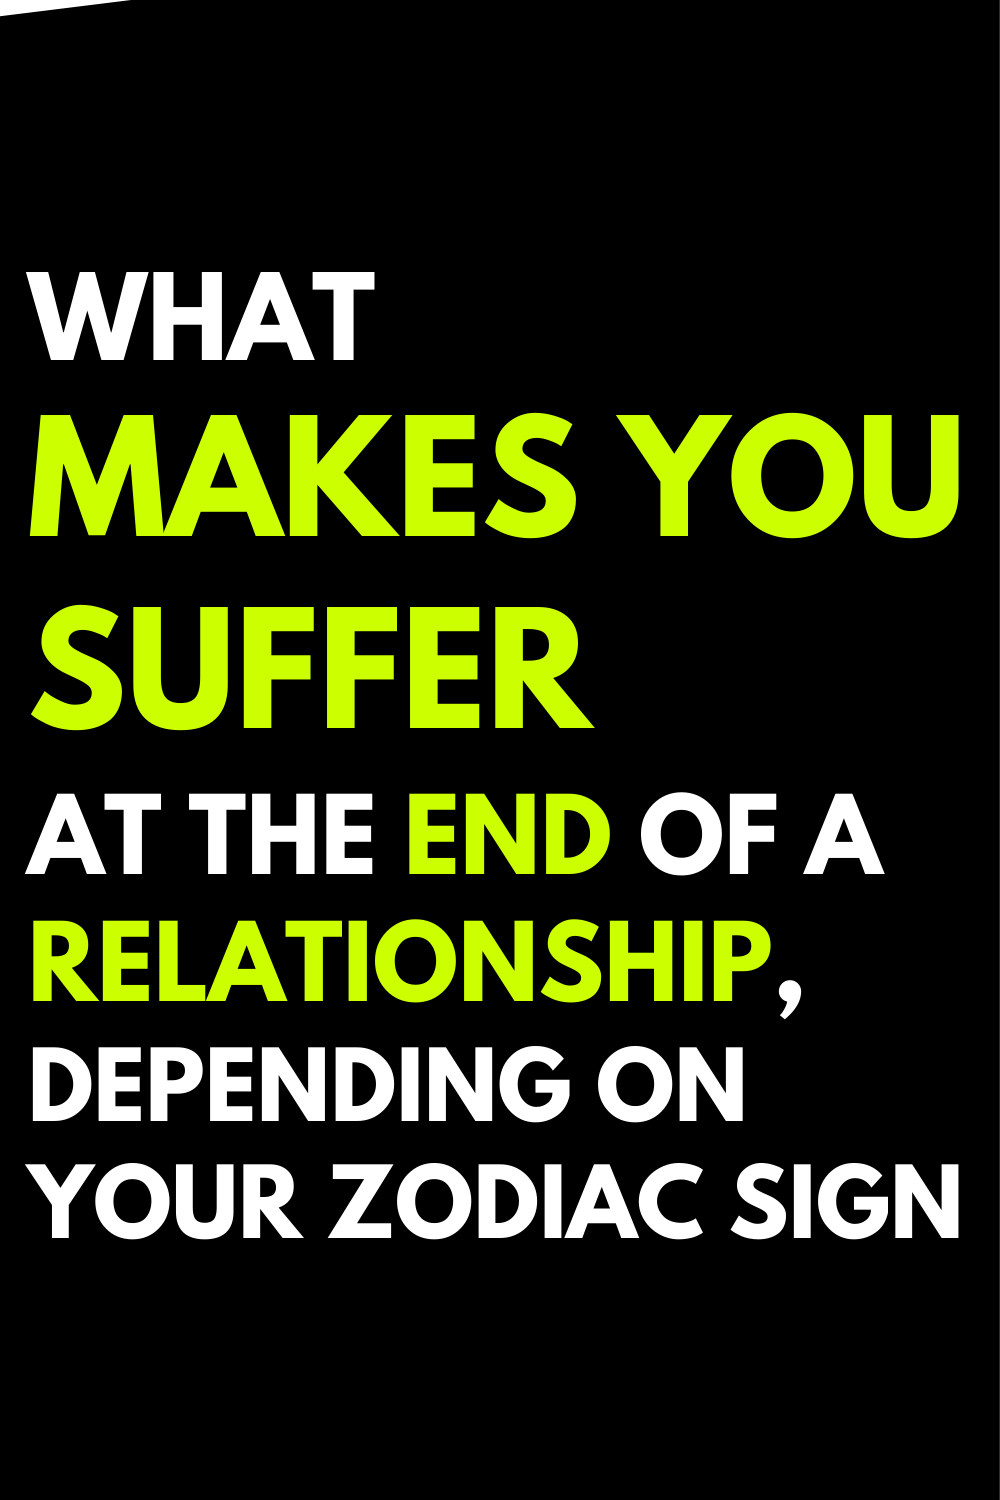 What makes you suffer at the end of a relationship, depending on your zodiac sign